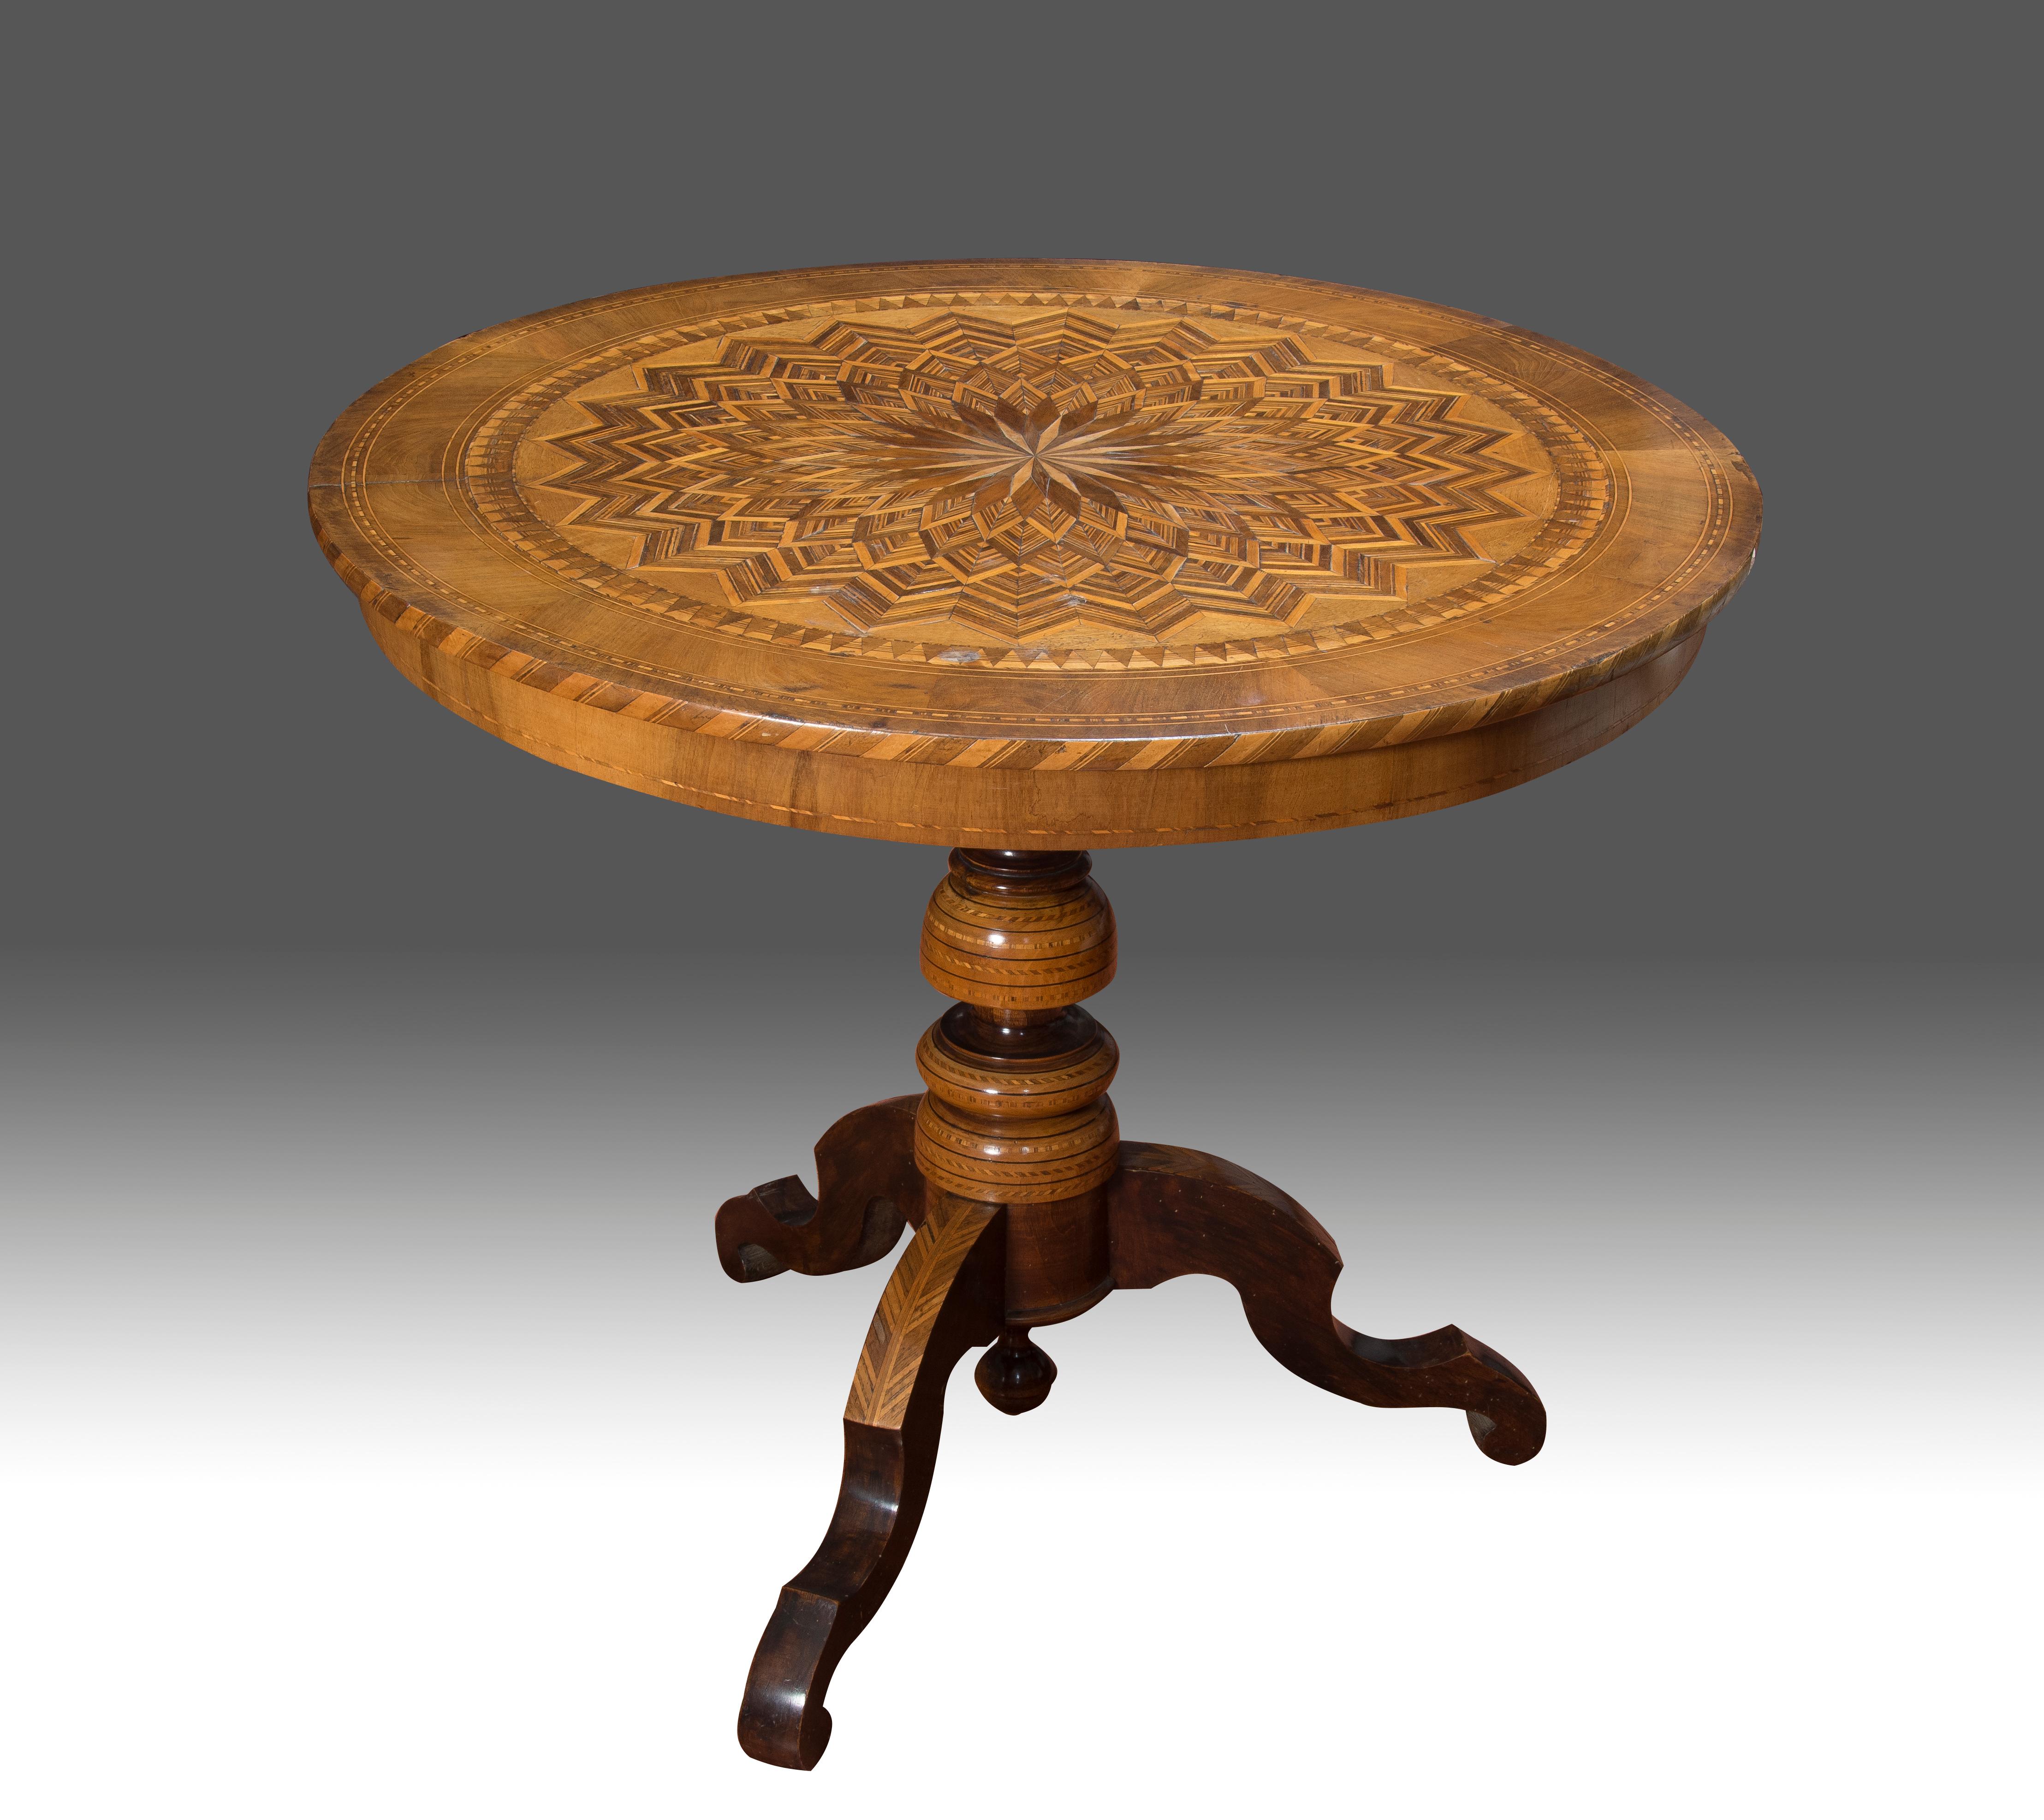 On three legs stands the table with turned leg, which supports the tabletop, round and with a magnificent geometric marquetry decoration, made by taking a simple element and repeating it in a circular sense, combined with bands of triangles and